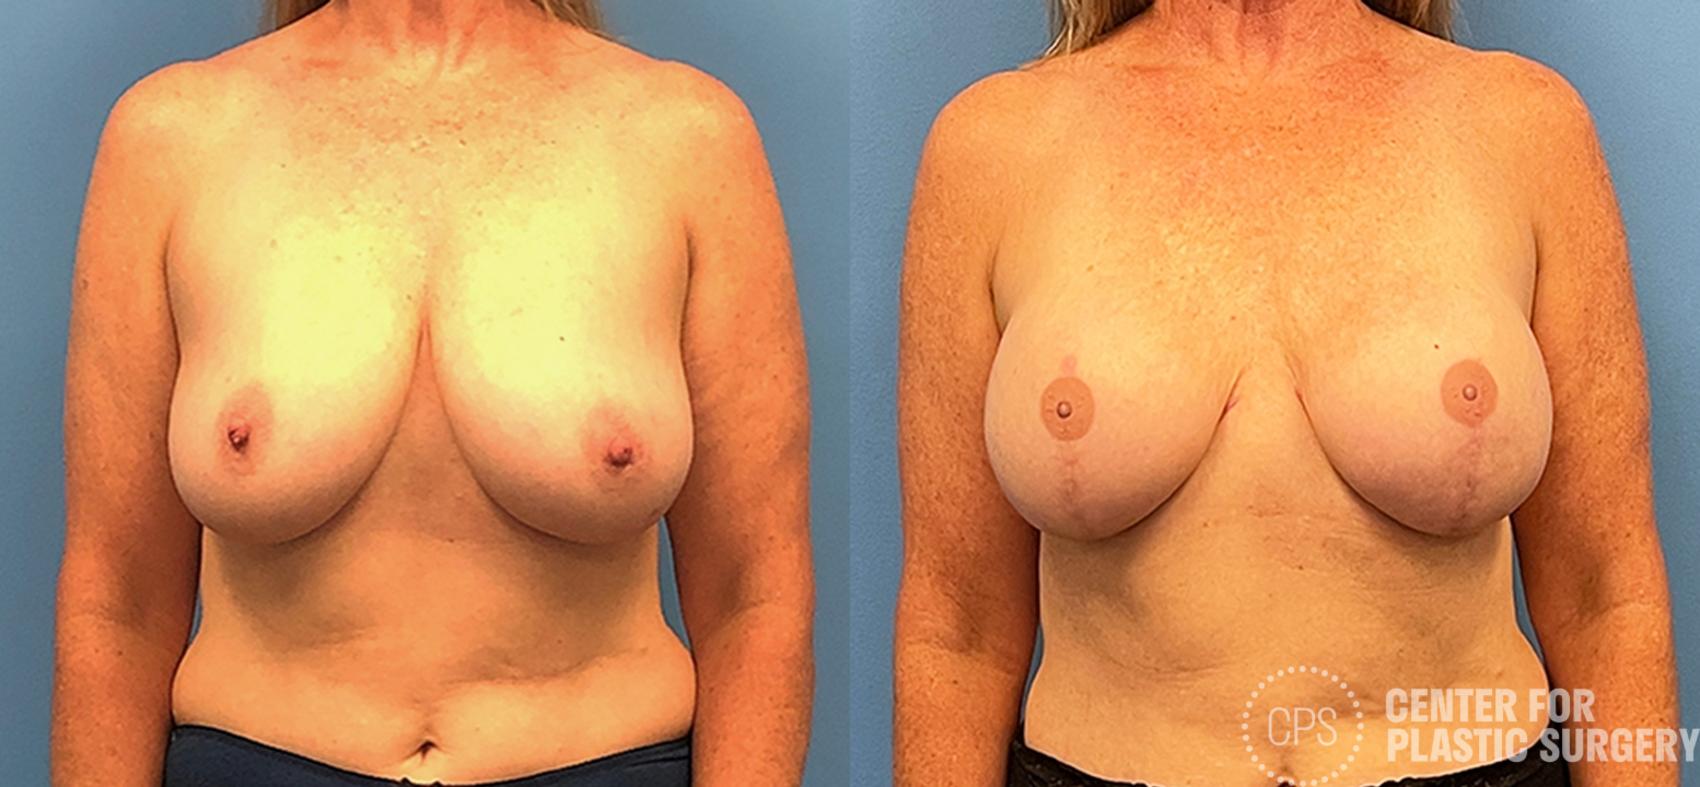 Before and After of a Breast Reconstruction and nipple reconstruction by Dr. Samir Rao. 